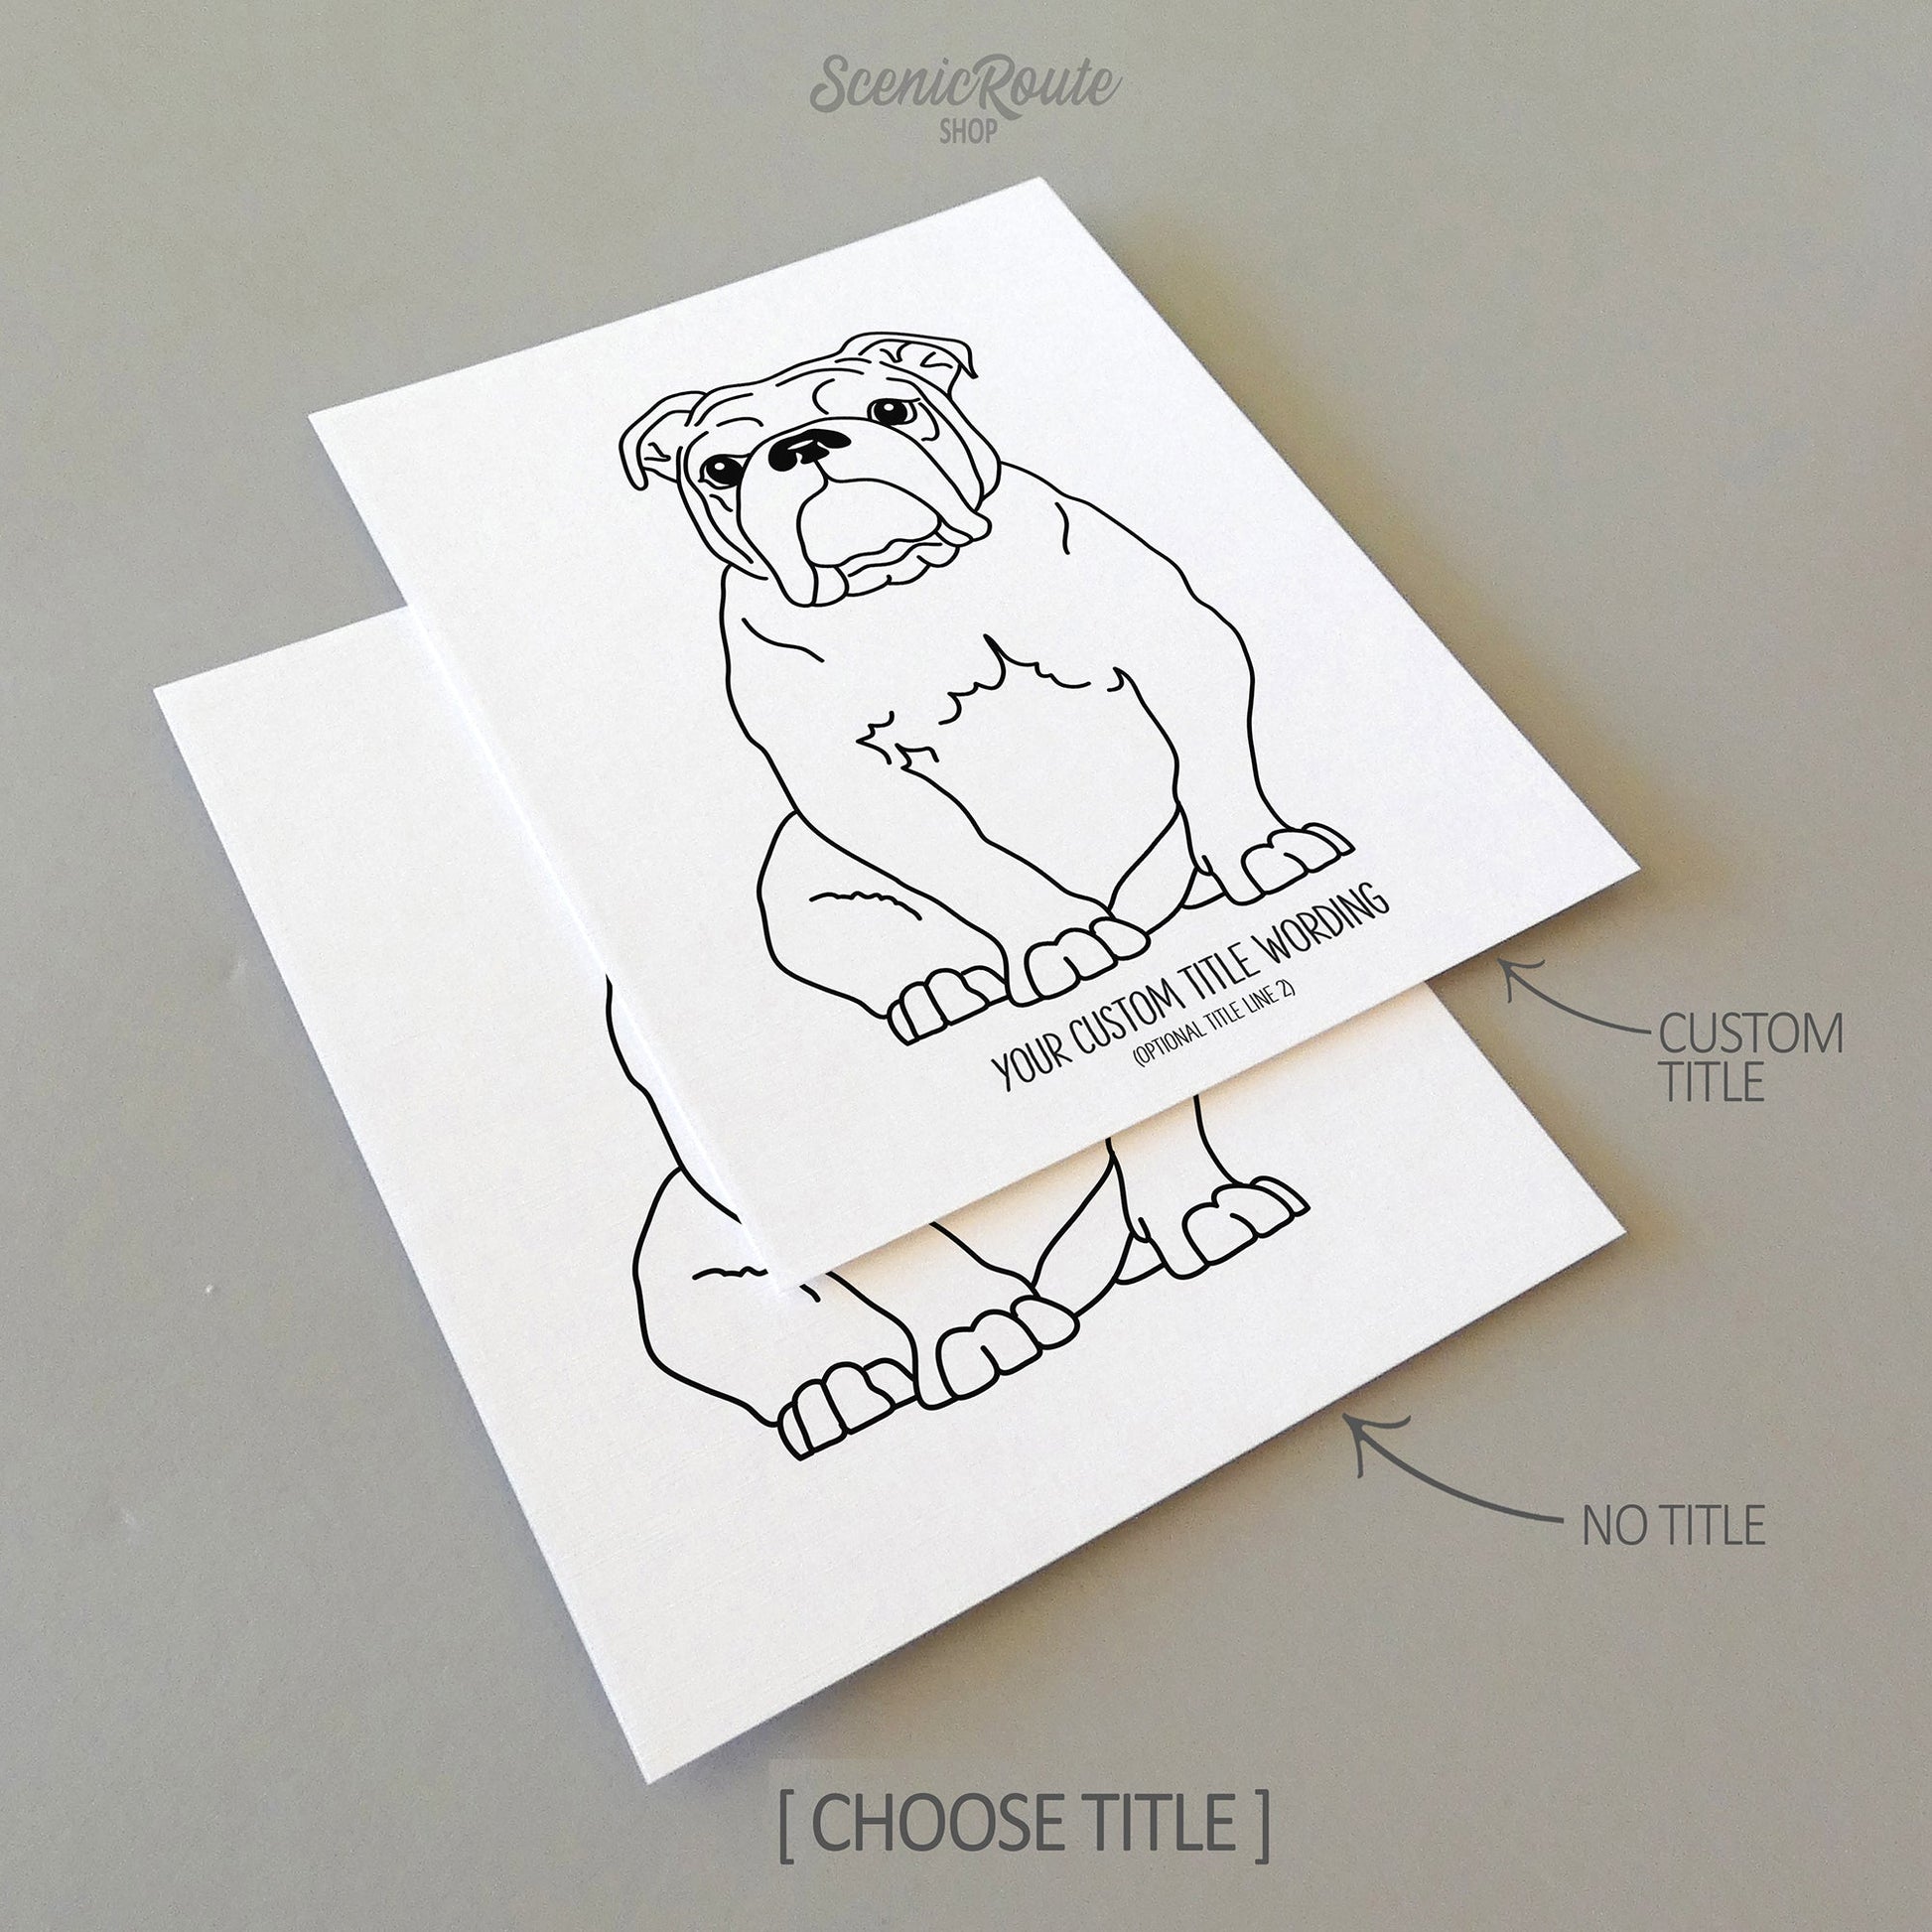 Two drawings of a Bulldog dog on white linen paper with a gray background.  Pieces are shown with “No Title” and “Custom Title” options to illustrate the available art print options.